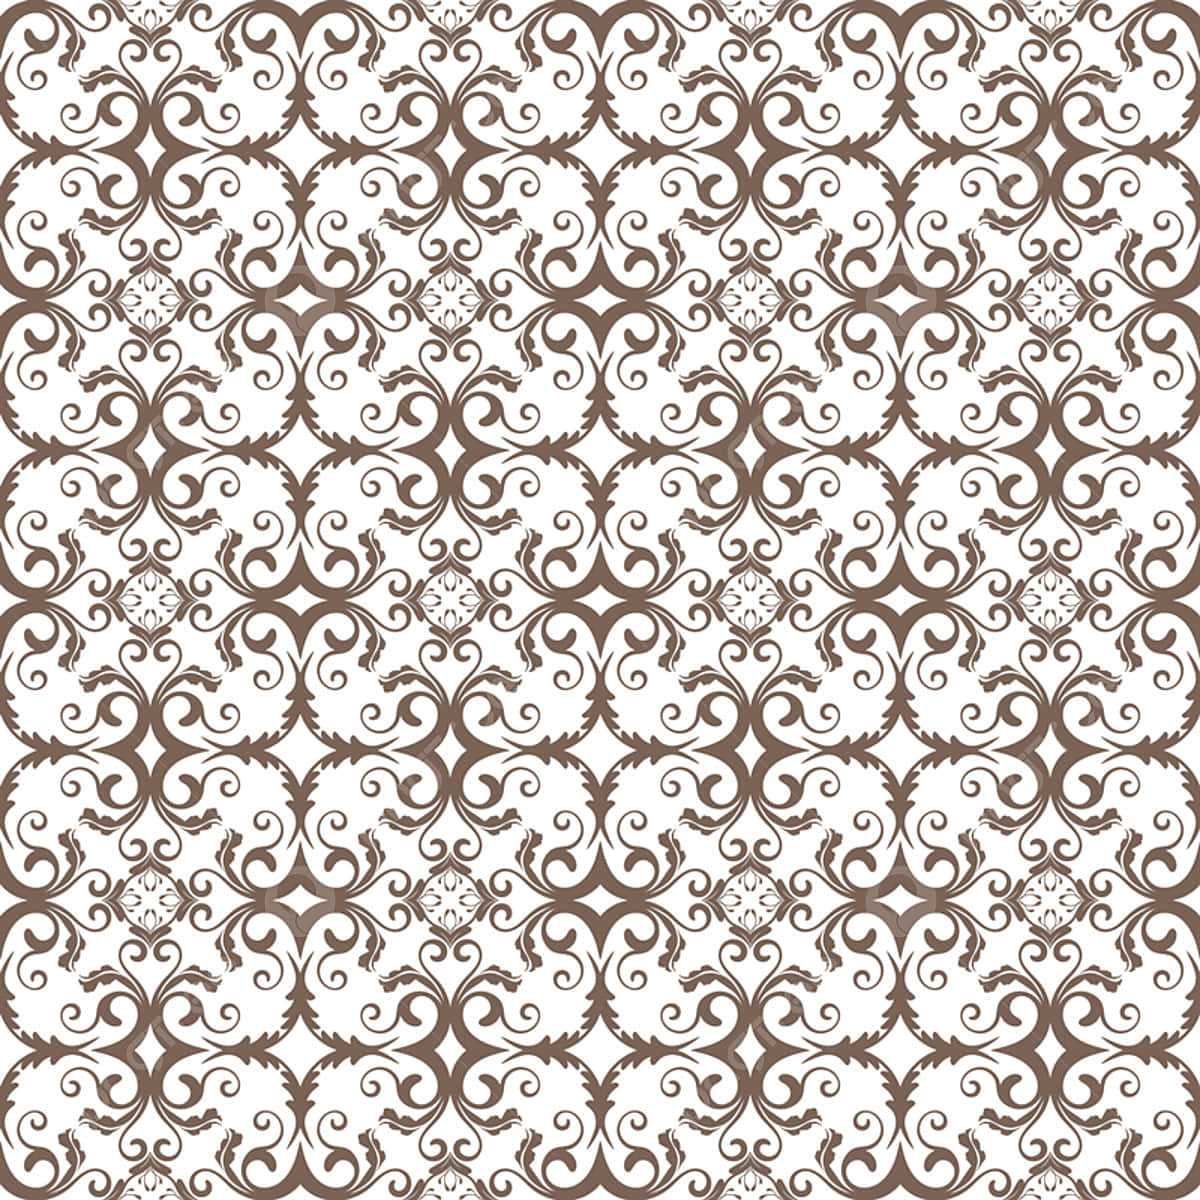 A beige and pink floral pattern wallpaper with asymmetrical shape